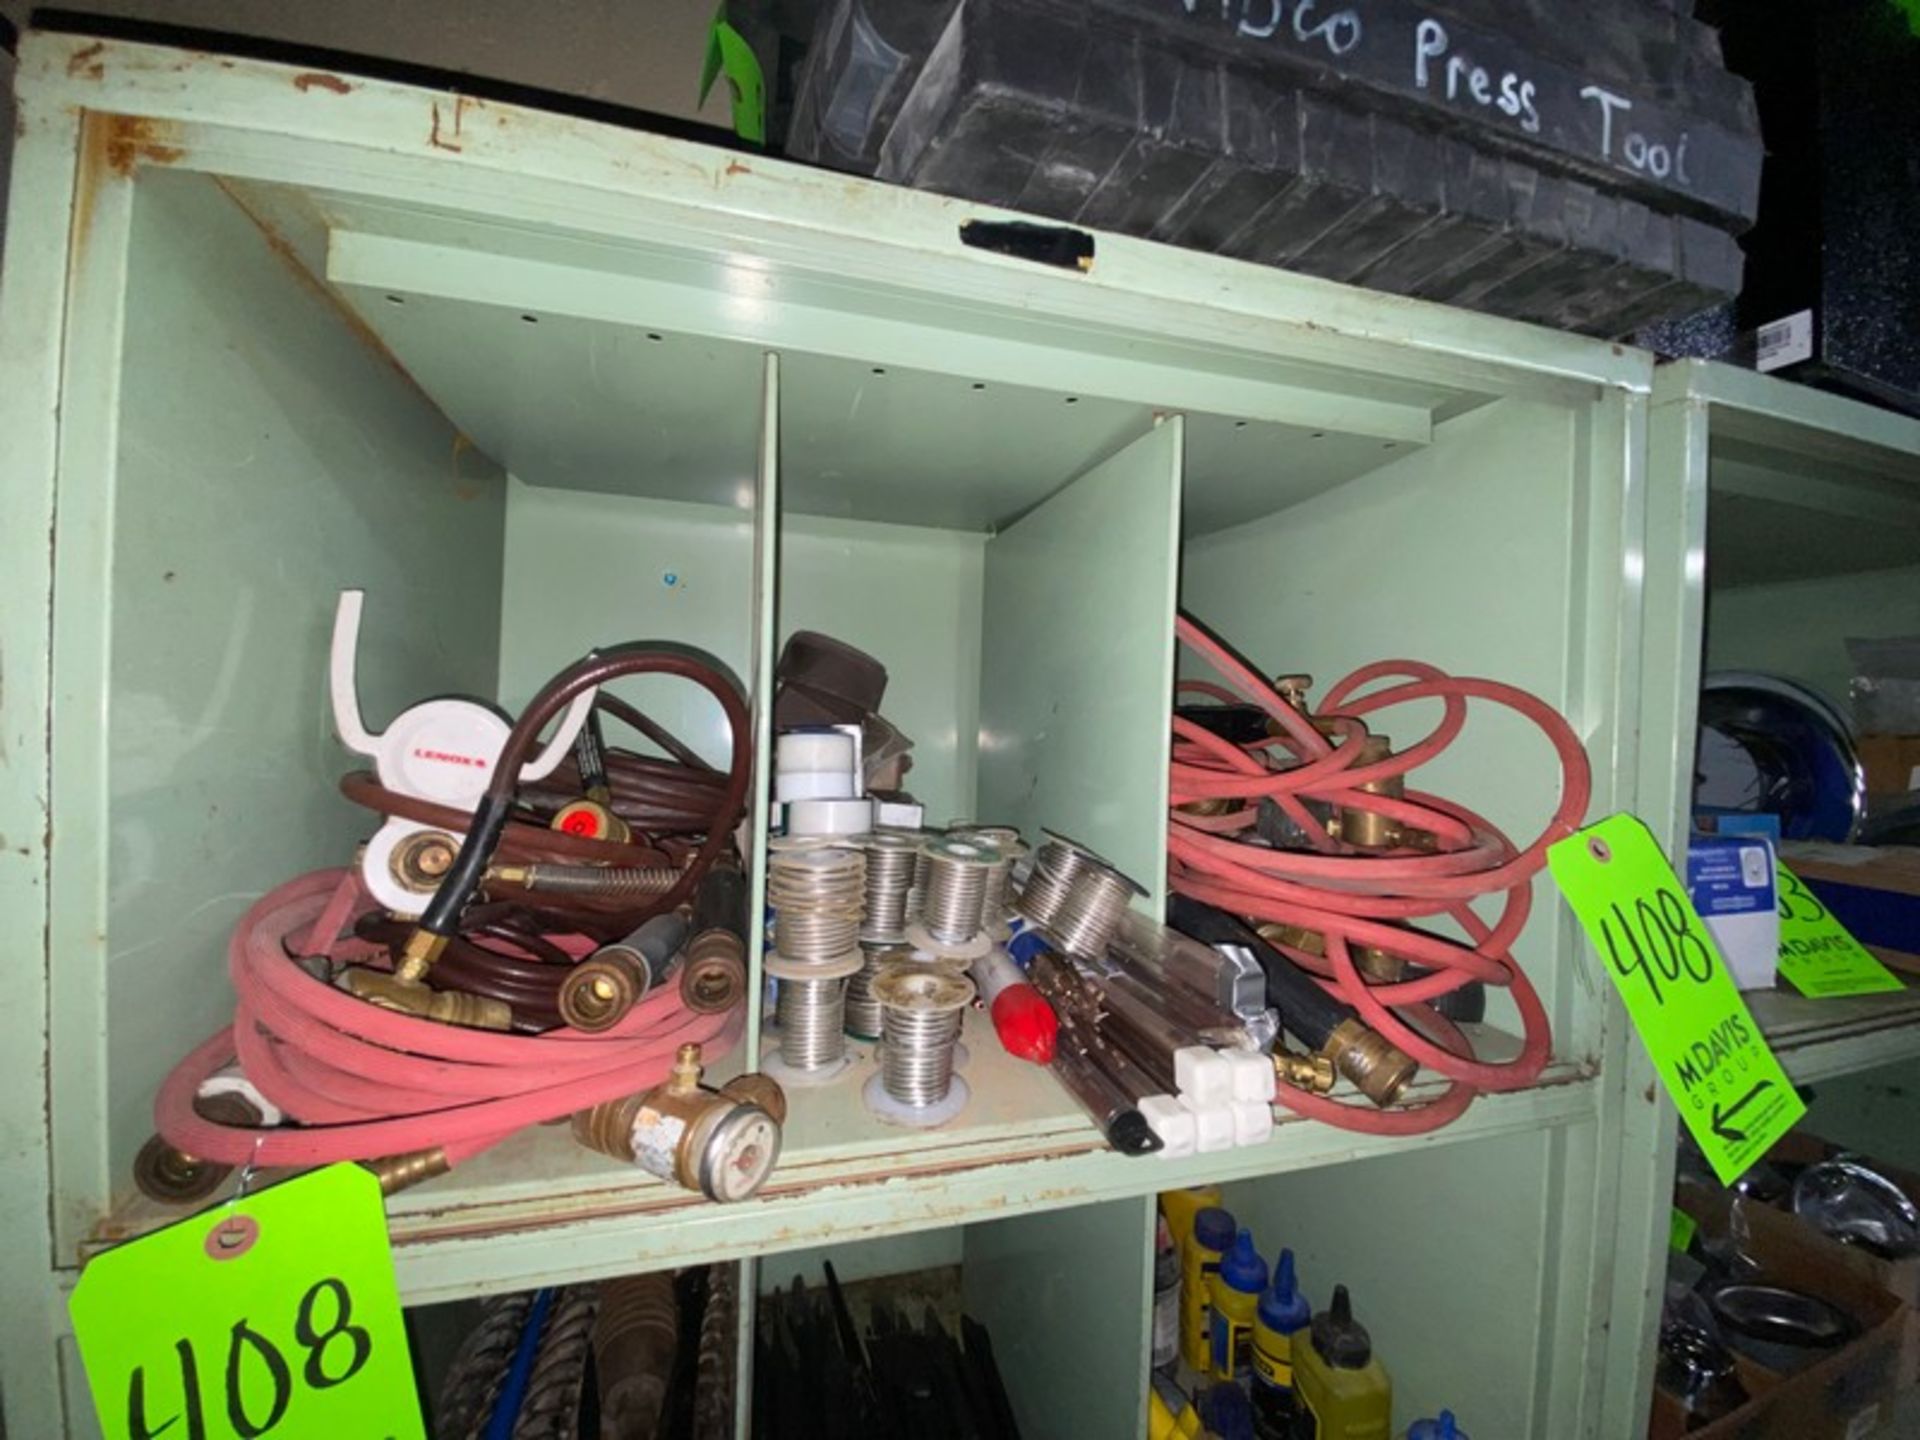 Contents of (3) Cubby Holes, Includes Sprolls of Wire & Assorted Hose (LOCATED IN MONROEVILLE, PA)